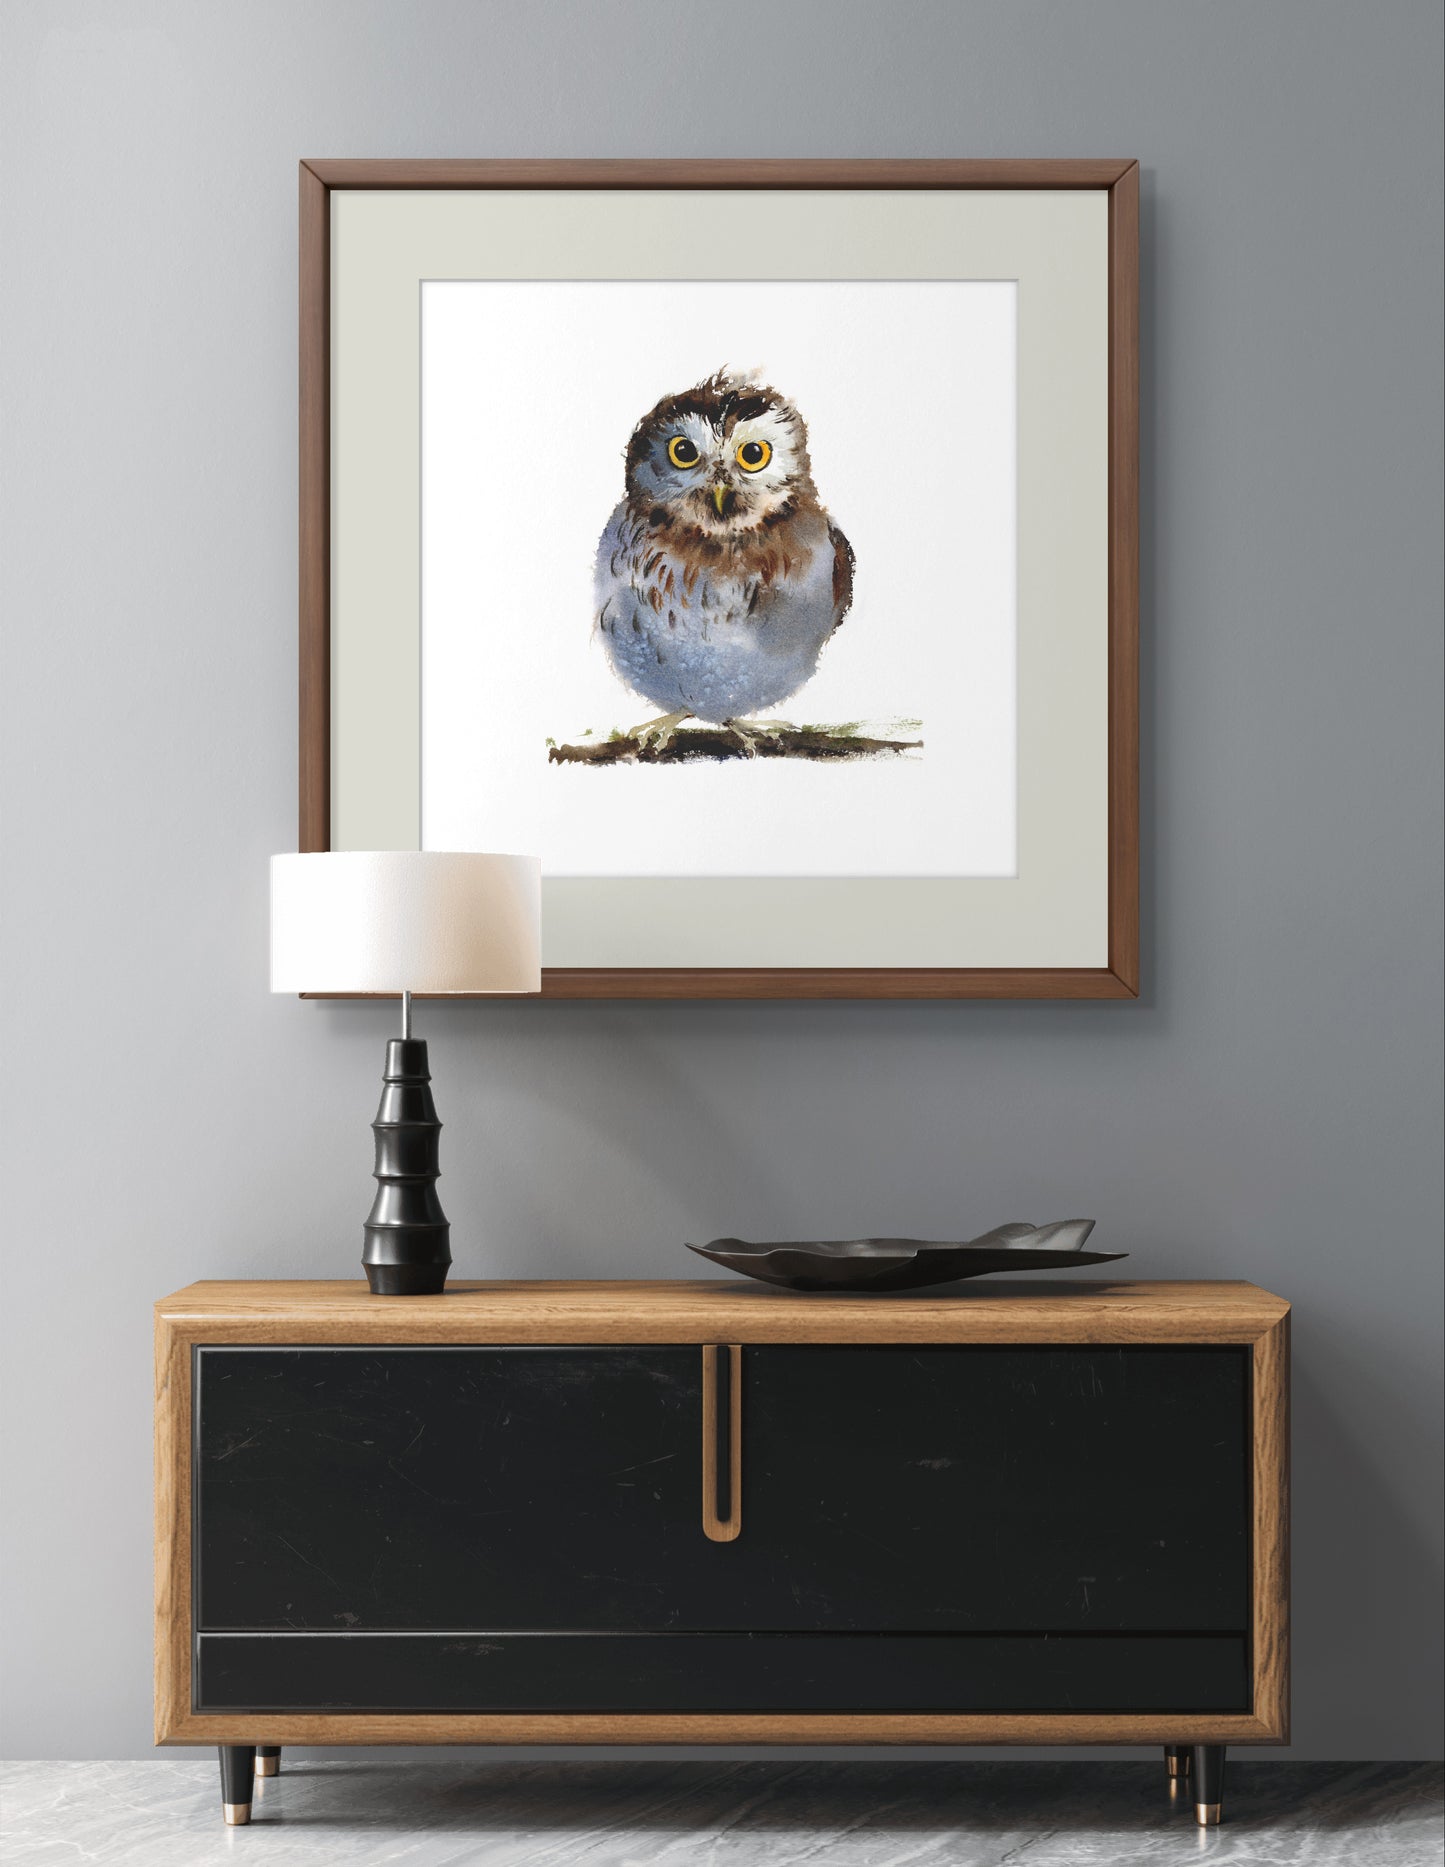 Whimsical Owl Painting Print - Museum-Quality Art Paper and Canvas Options